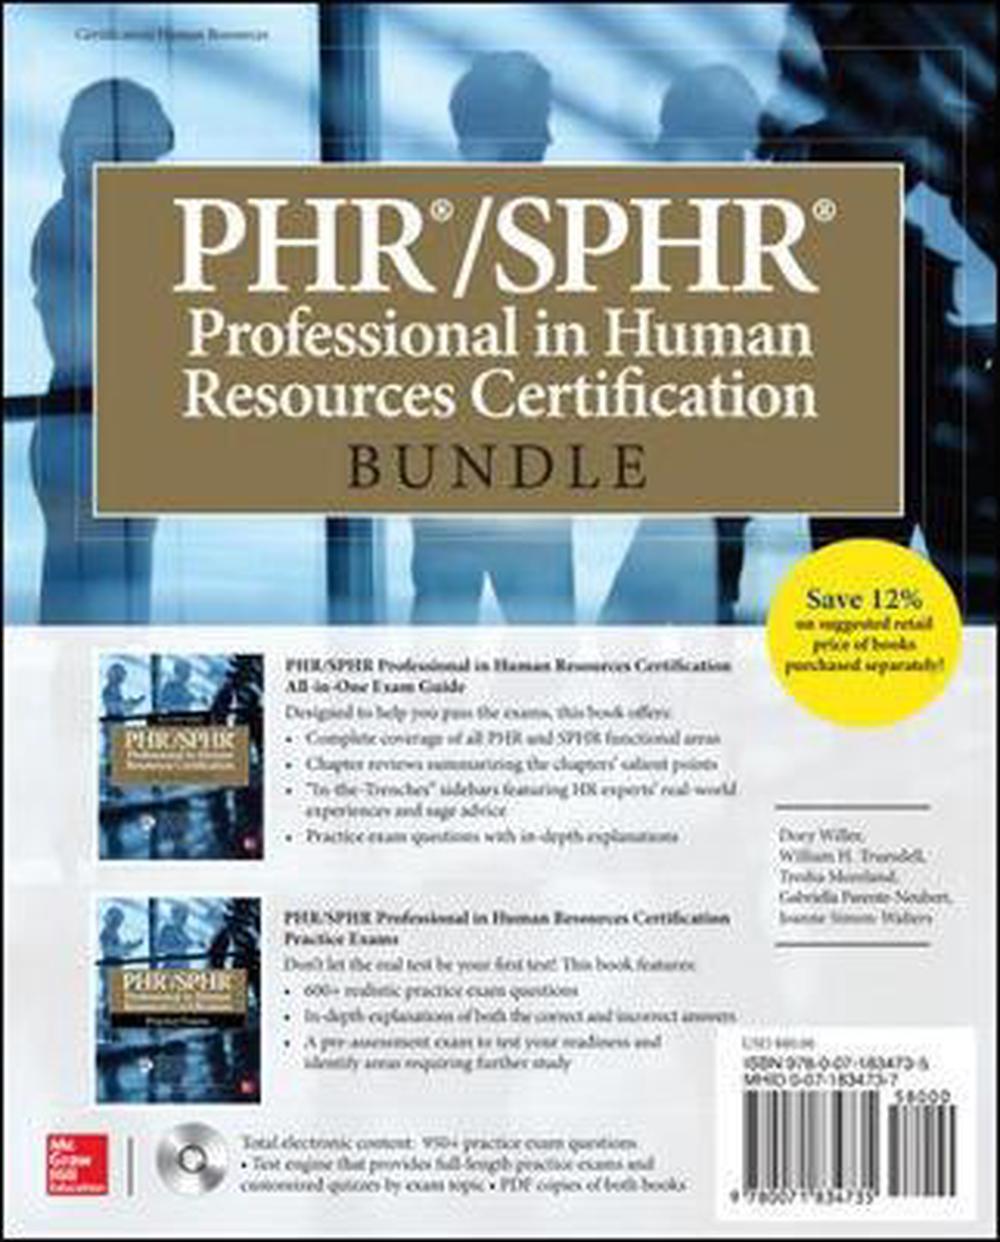 PHR/SPHR Professional in Human Resources Certification Bundle by Dory Willer (En 9780071834735